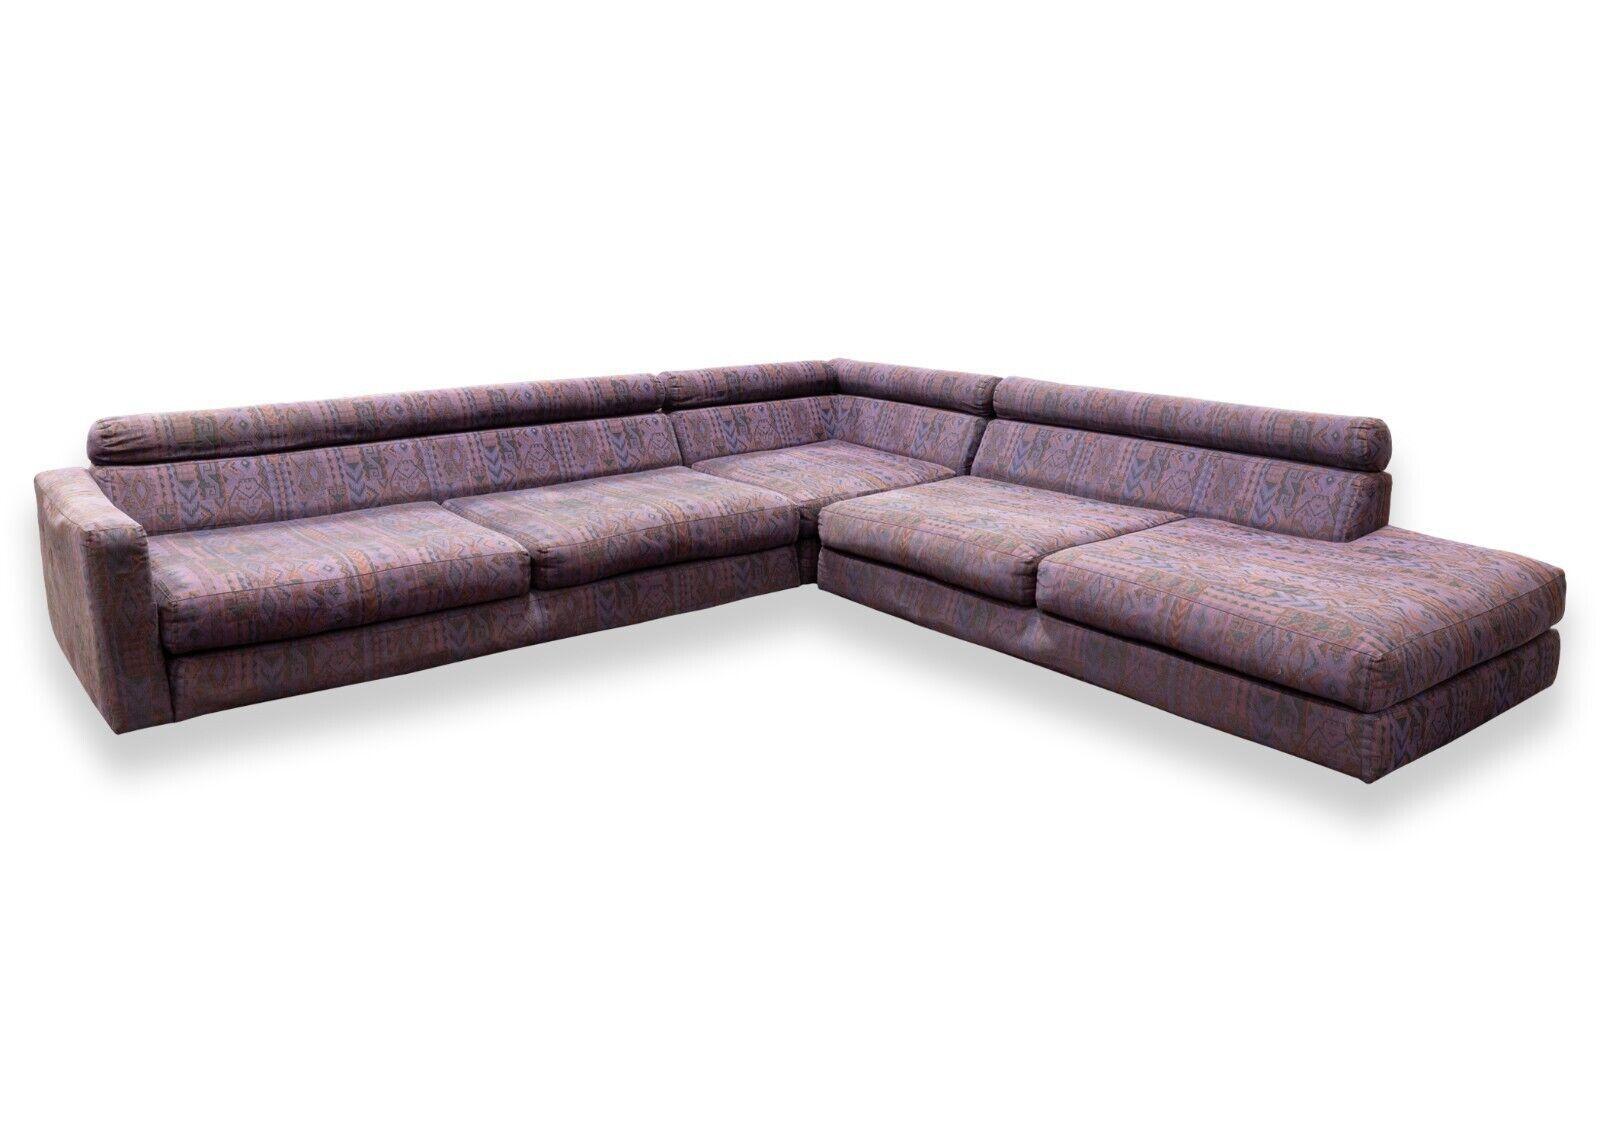 A Roche Bobois purple two piece sofa sectional. This sofa sectional from luxury French furniture brand Roche Bobois features a two piece design. The left side a standard sofa, and the right corner a chaise style corner. This sofa is upholstered in a